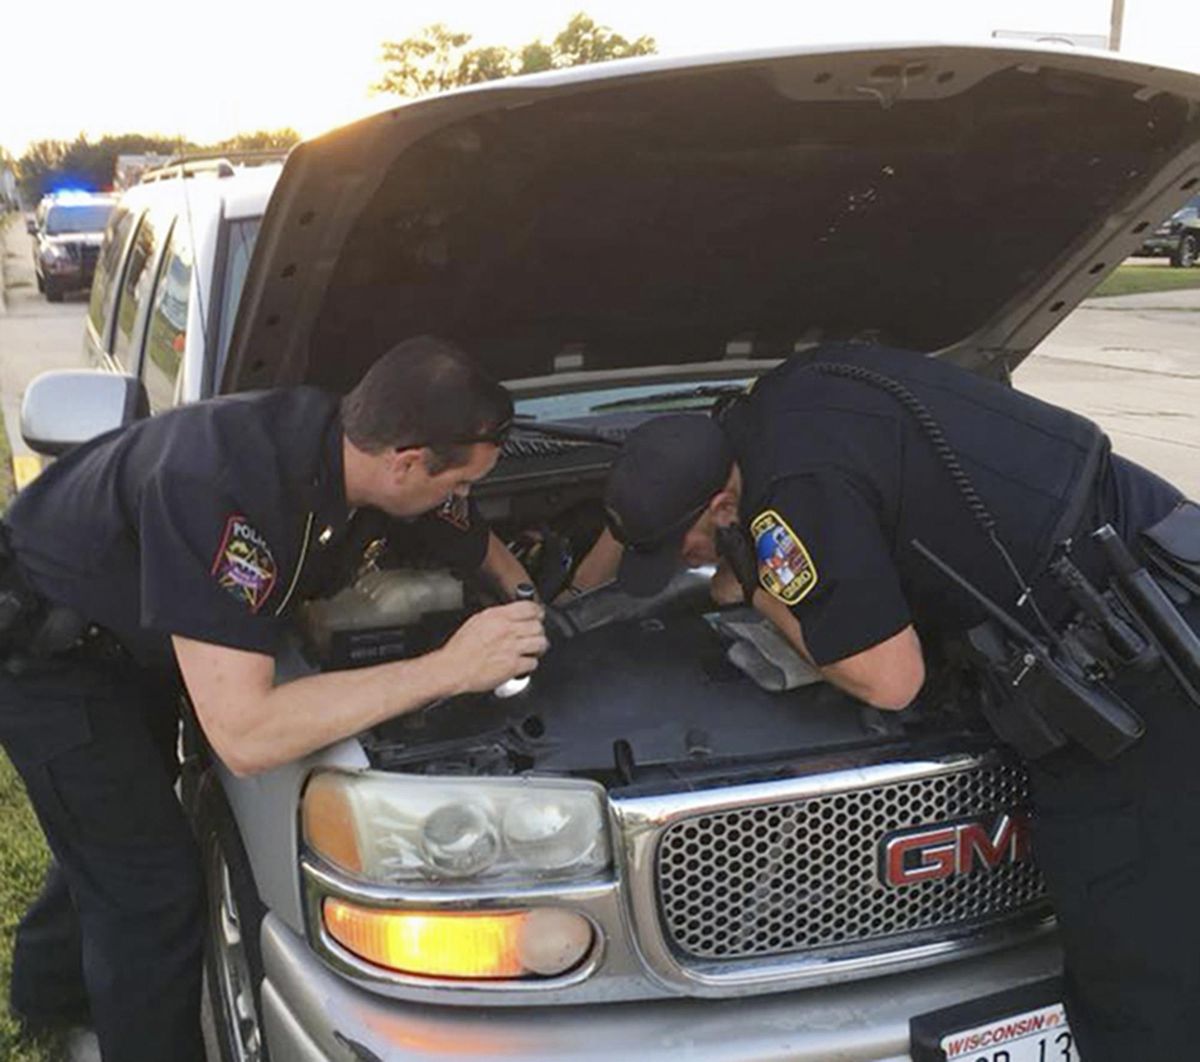 This Wednesday, Aug. 22, 2018, photo provided by the Omro Police Department in Omro, Wis., shows police officers trying to remove a 4-foot-long Ball python that was discovered wrapped around a car engine. It took hours to unwind and coax the snake from the engine compartment. Police say the snake escaped from its owner more than a month ago. (AP)